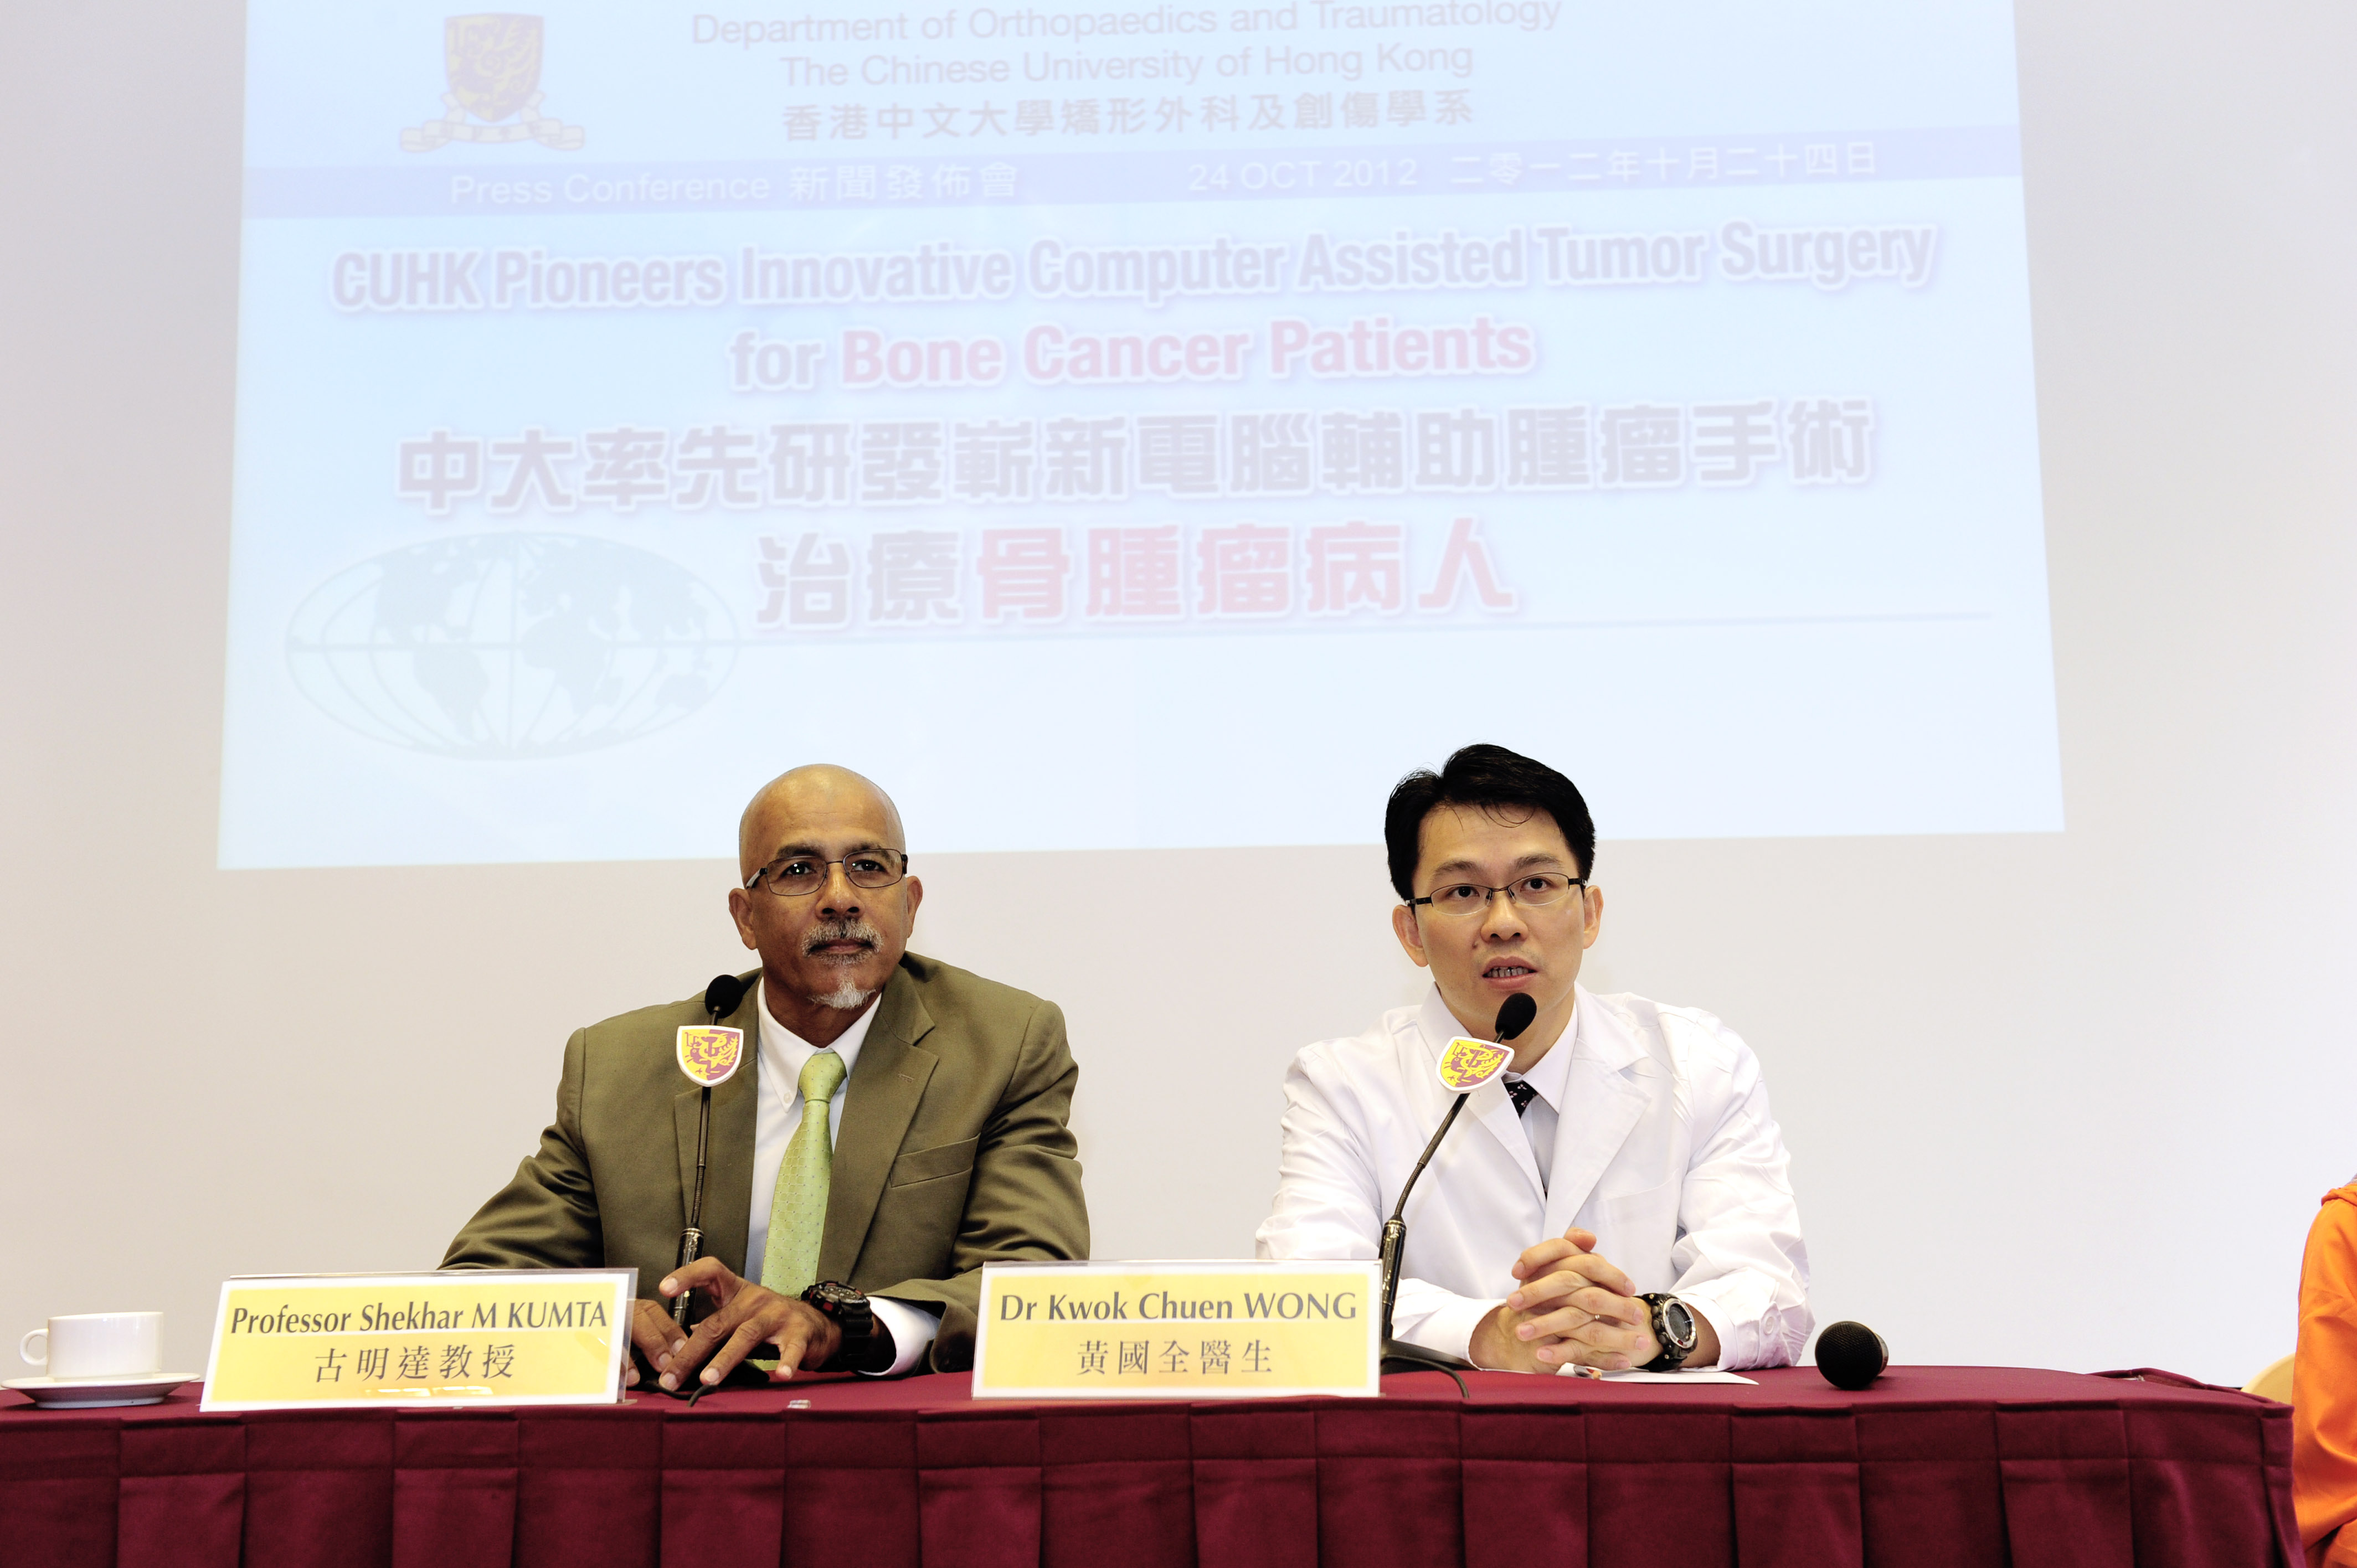 (From Left) Professor Shekhar Madhukar KUMTA, Professor, Department of Orthopaedics and Traumatology; and Dr. Kwok Chuen WONG, Clinical Assistant Professor (honorary), Department of Orthopaedics and Traumatology, CUHK present their recent research on the Computer Assisted Tumor Surgery for Bone Cancer Patients